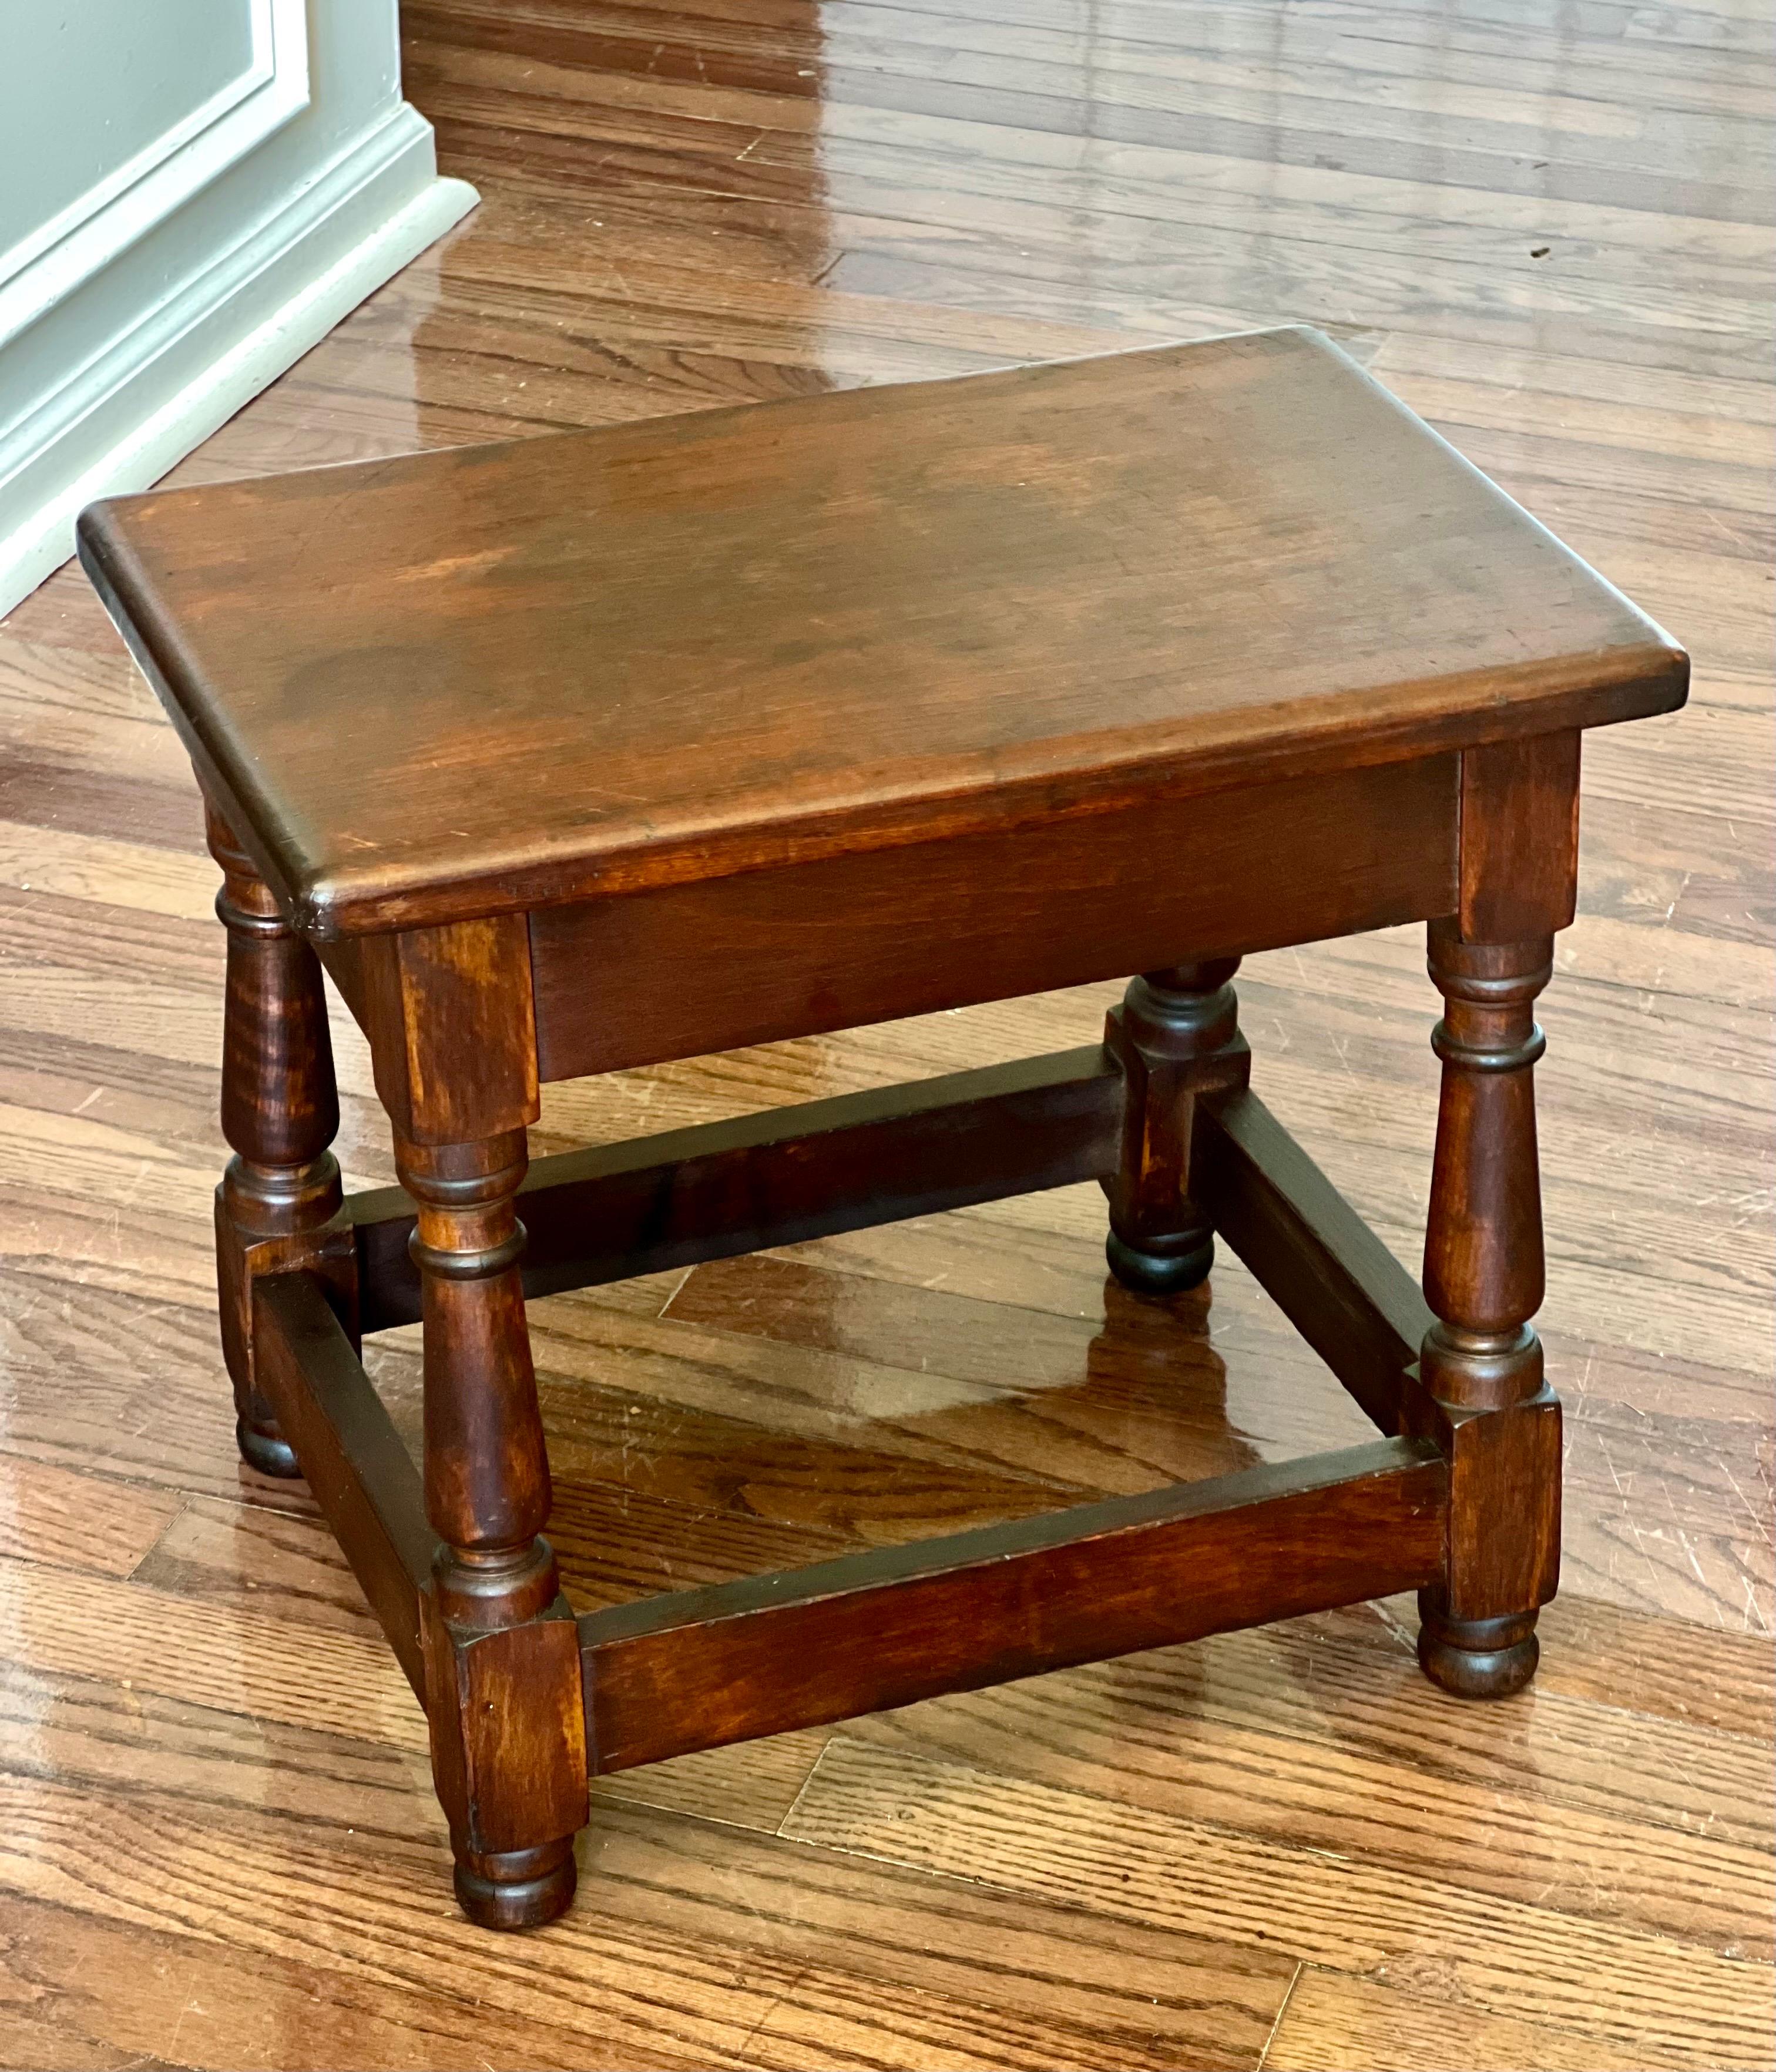 Antique English oak joint stool, England, circa 1880's.

Lovely oak stool with pegged mortise-and-tenon joints and splayed legs.  It features solid columnar turnings resembling the original design of household stools from the 17th century.  The